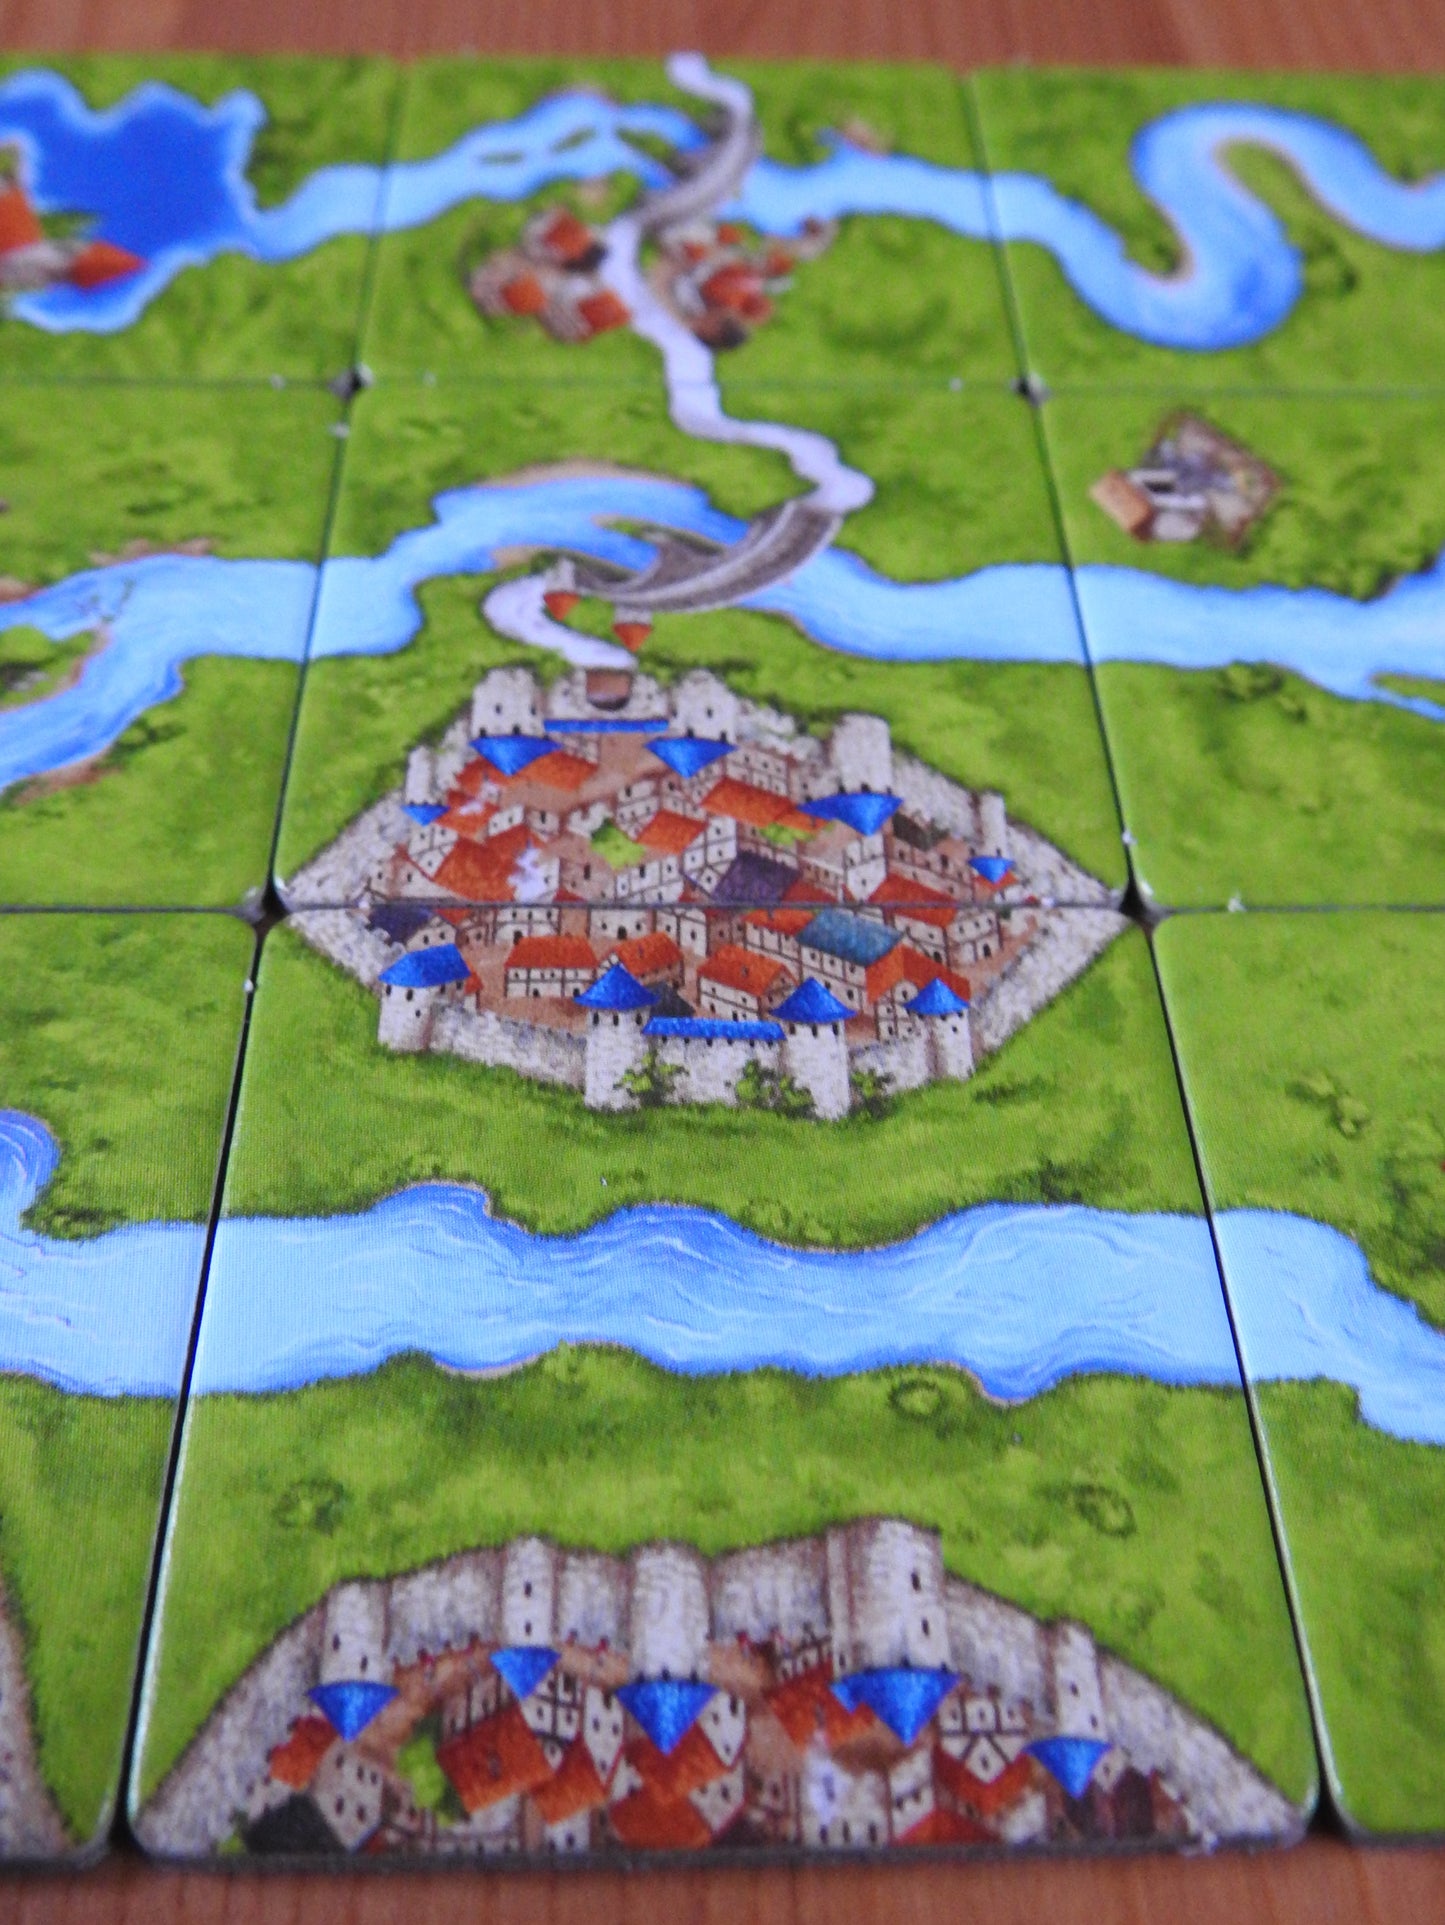 Close-up of some of the tiles, showing a lovely blue river winding its way through the lush landscape in this River I mini expansion for Carcassonne.